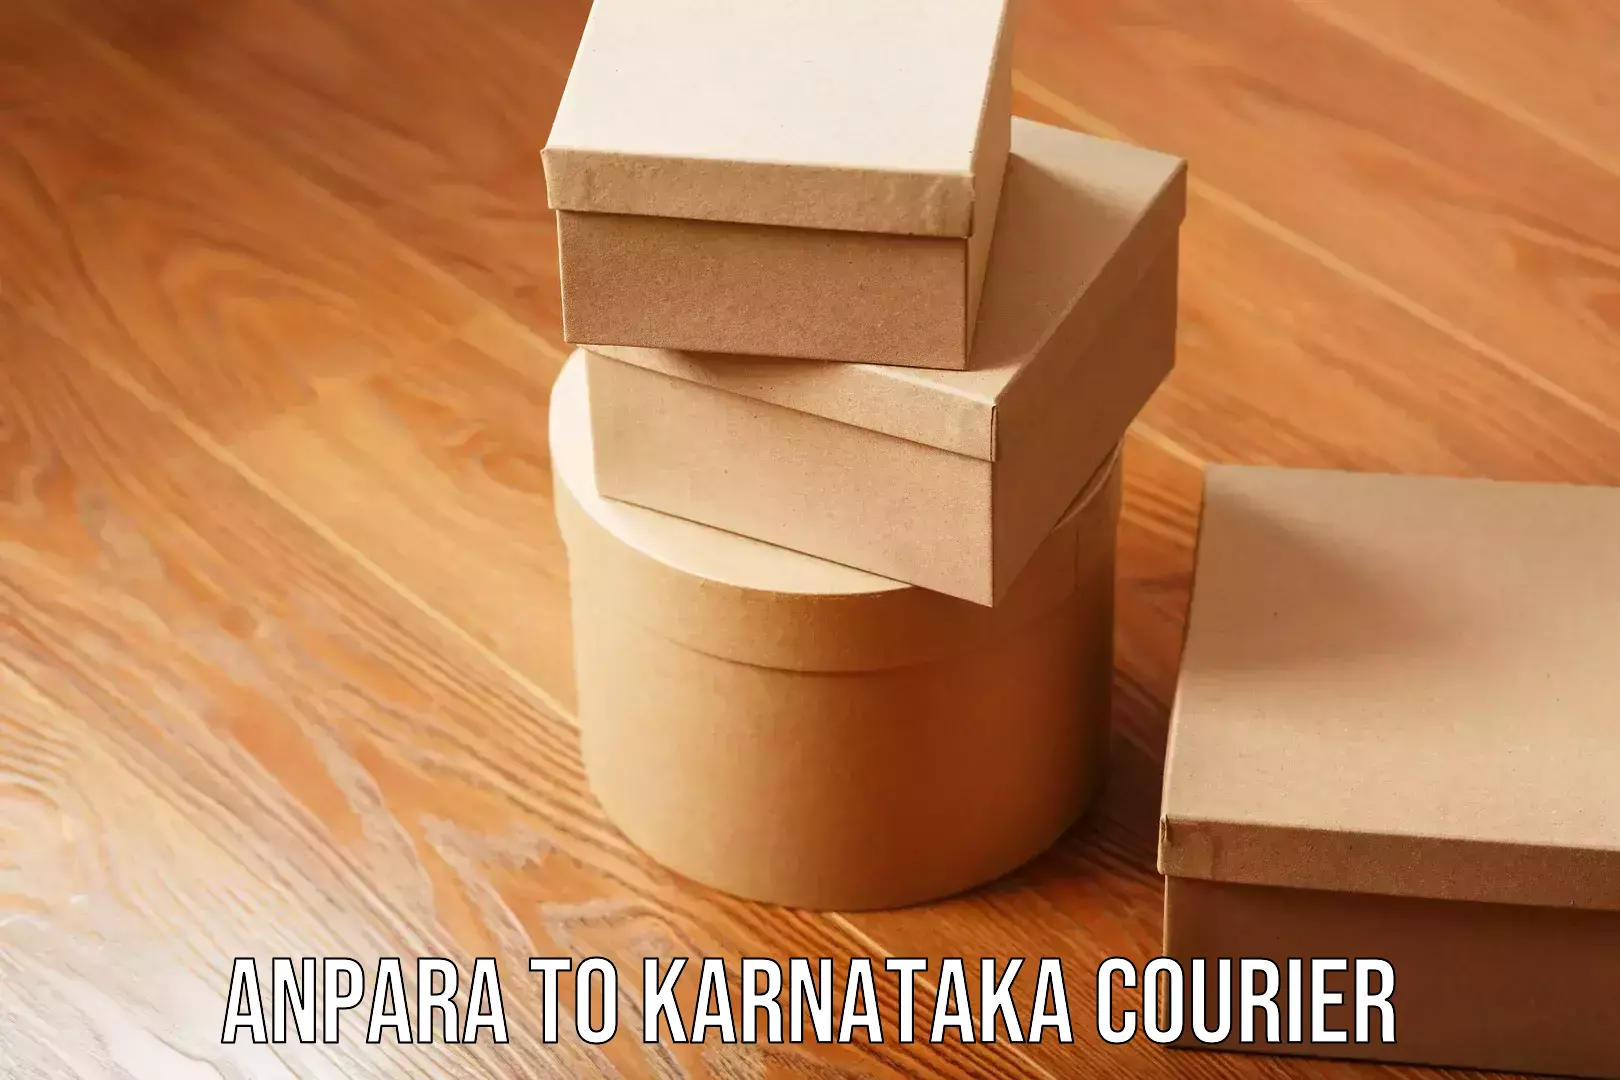 Cost-effective courier options Anpara to Karnataka